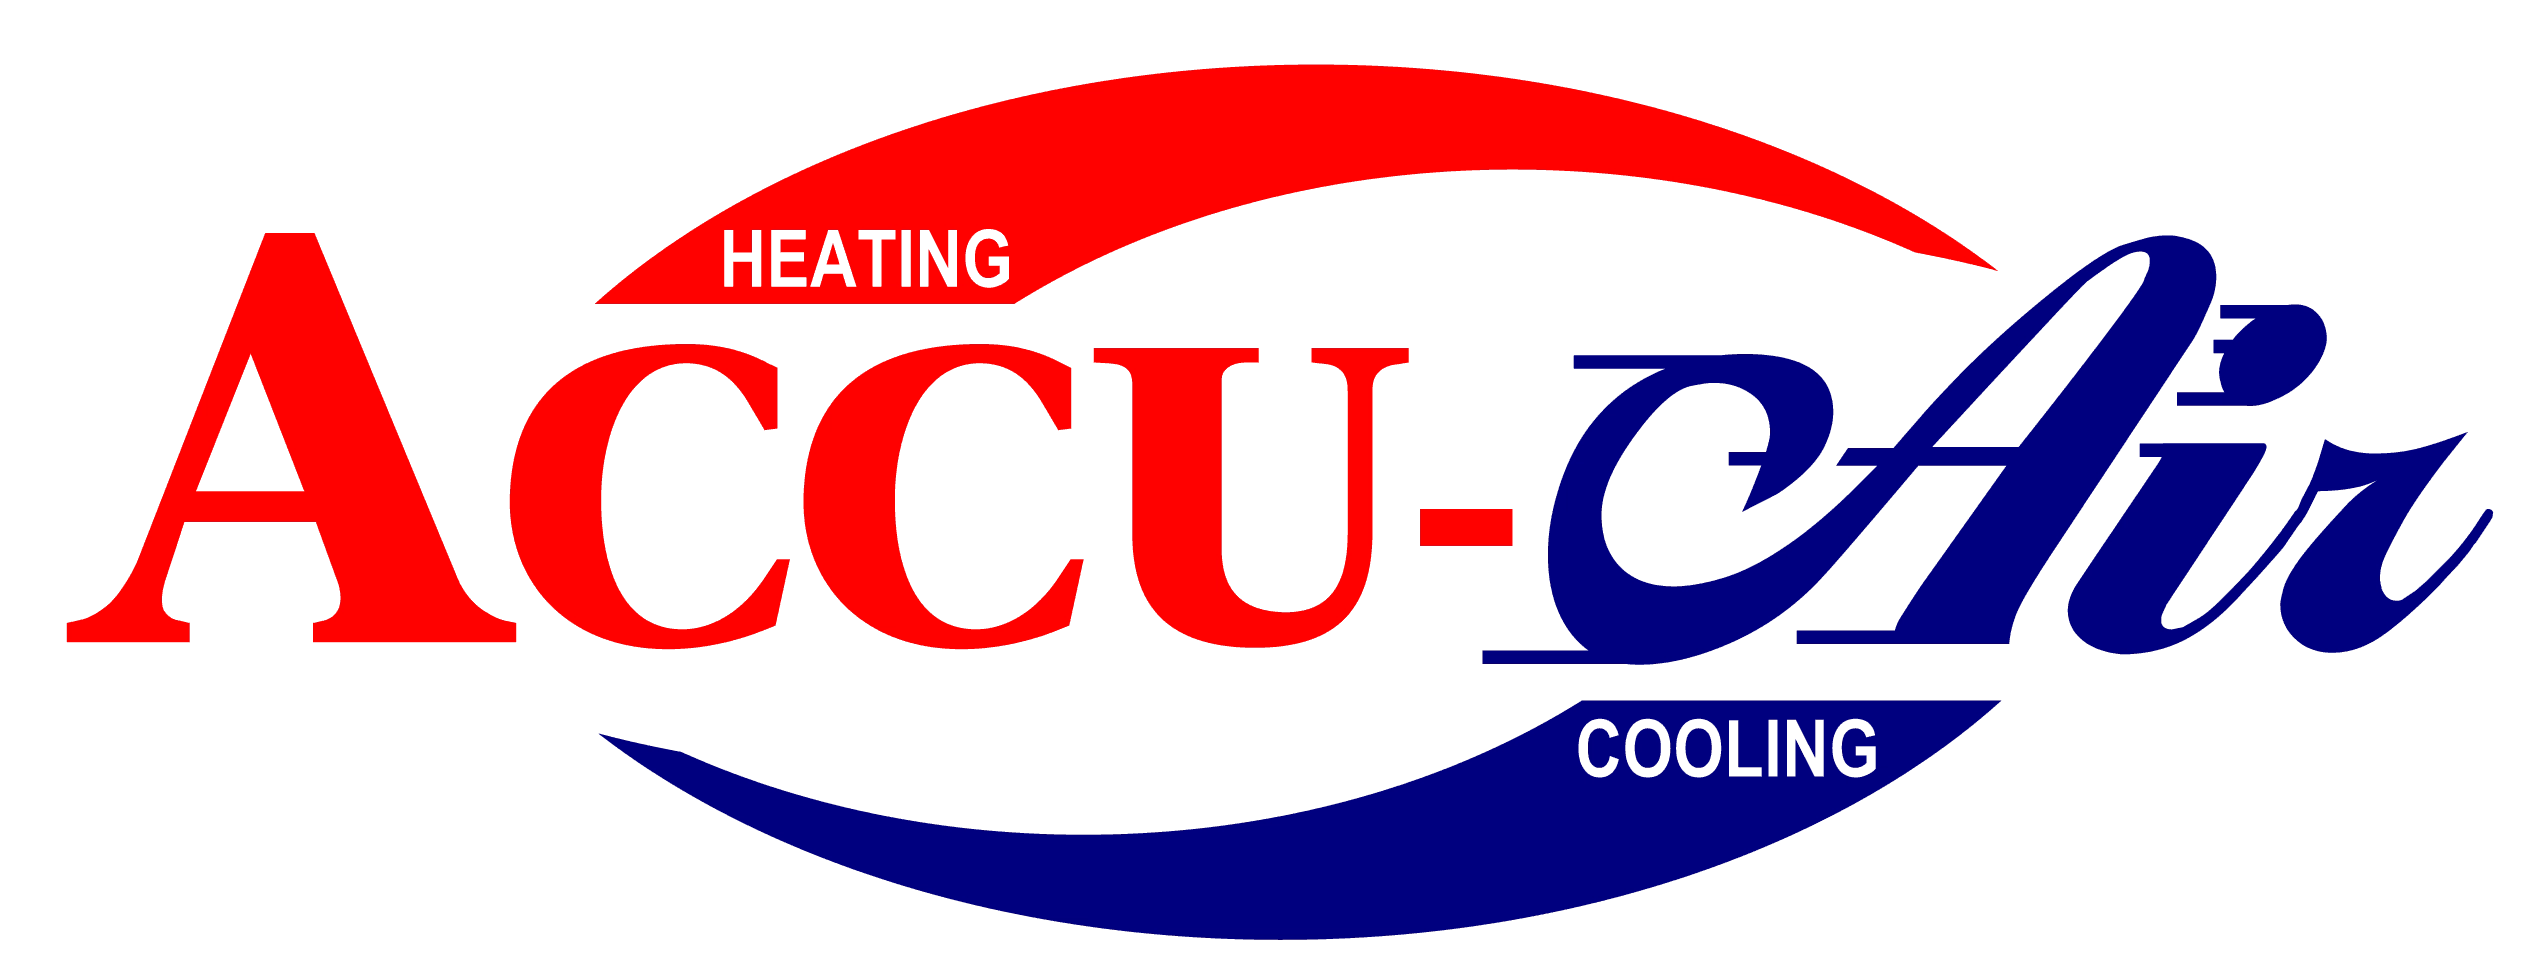 Accu-Air Heating and Cooling Logo